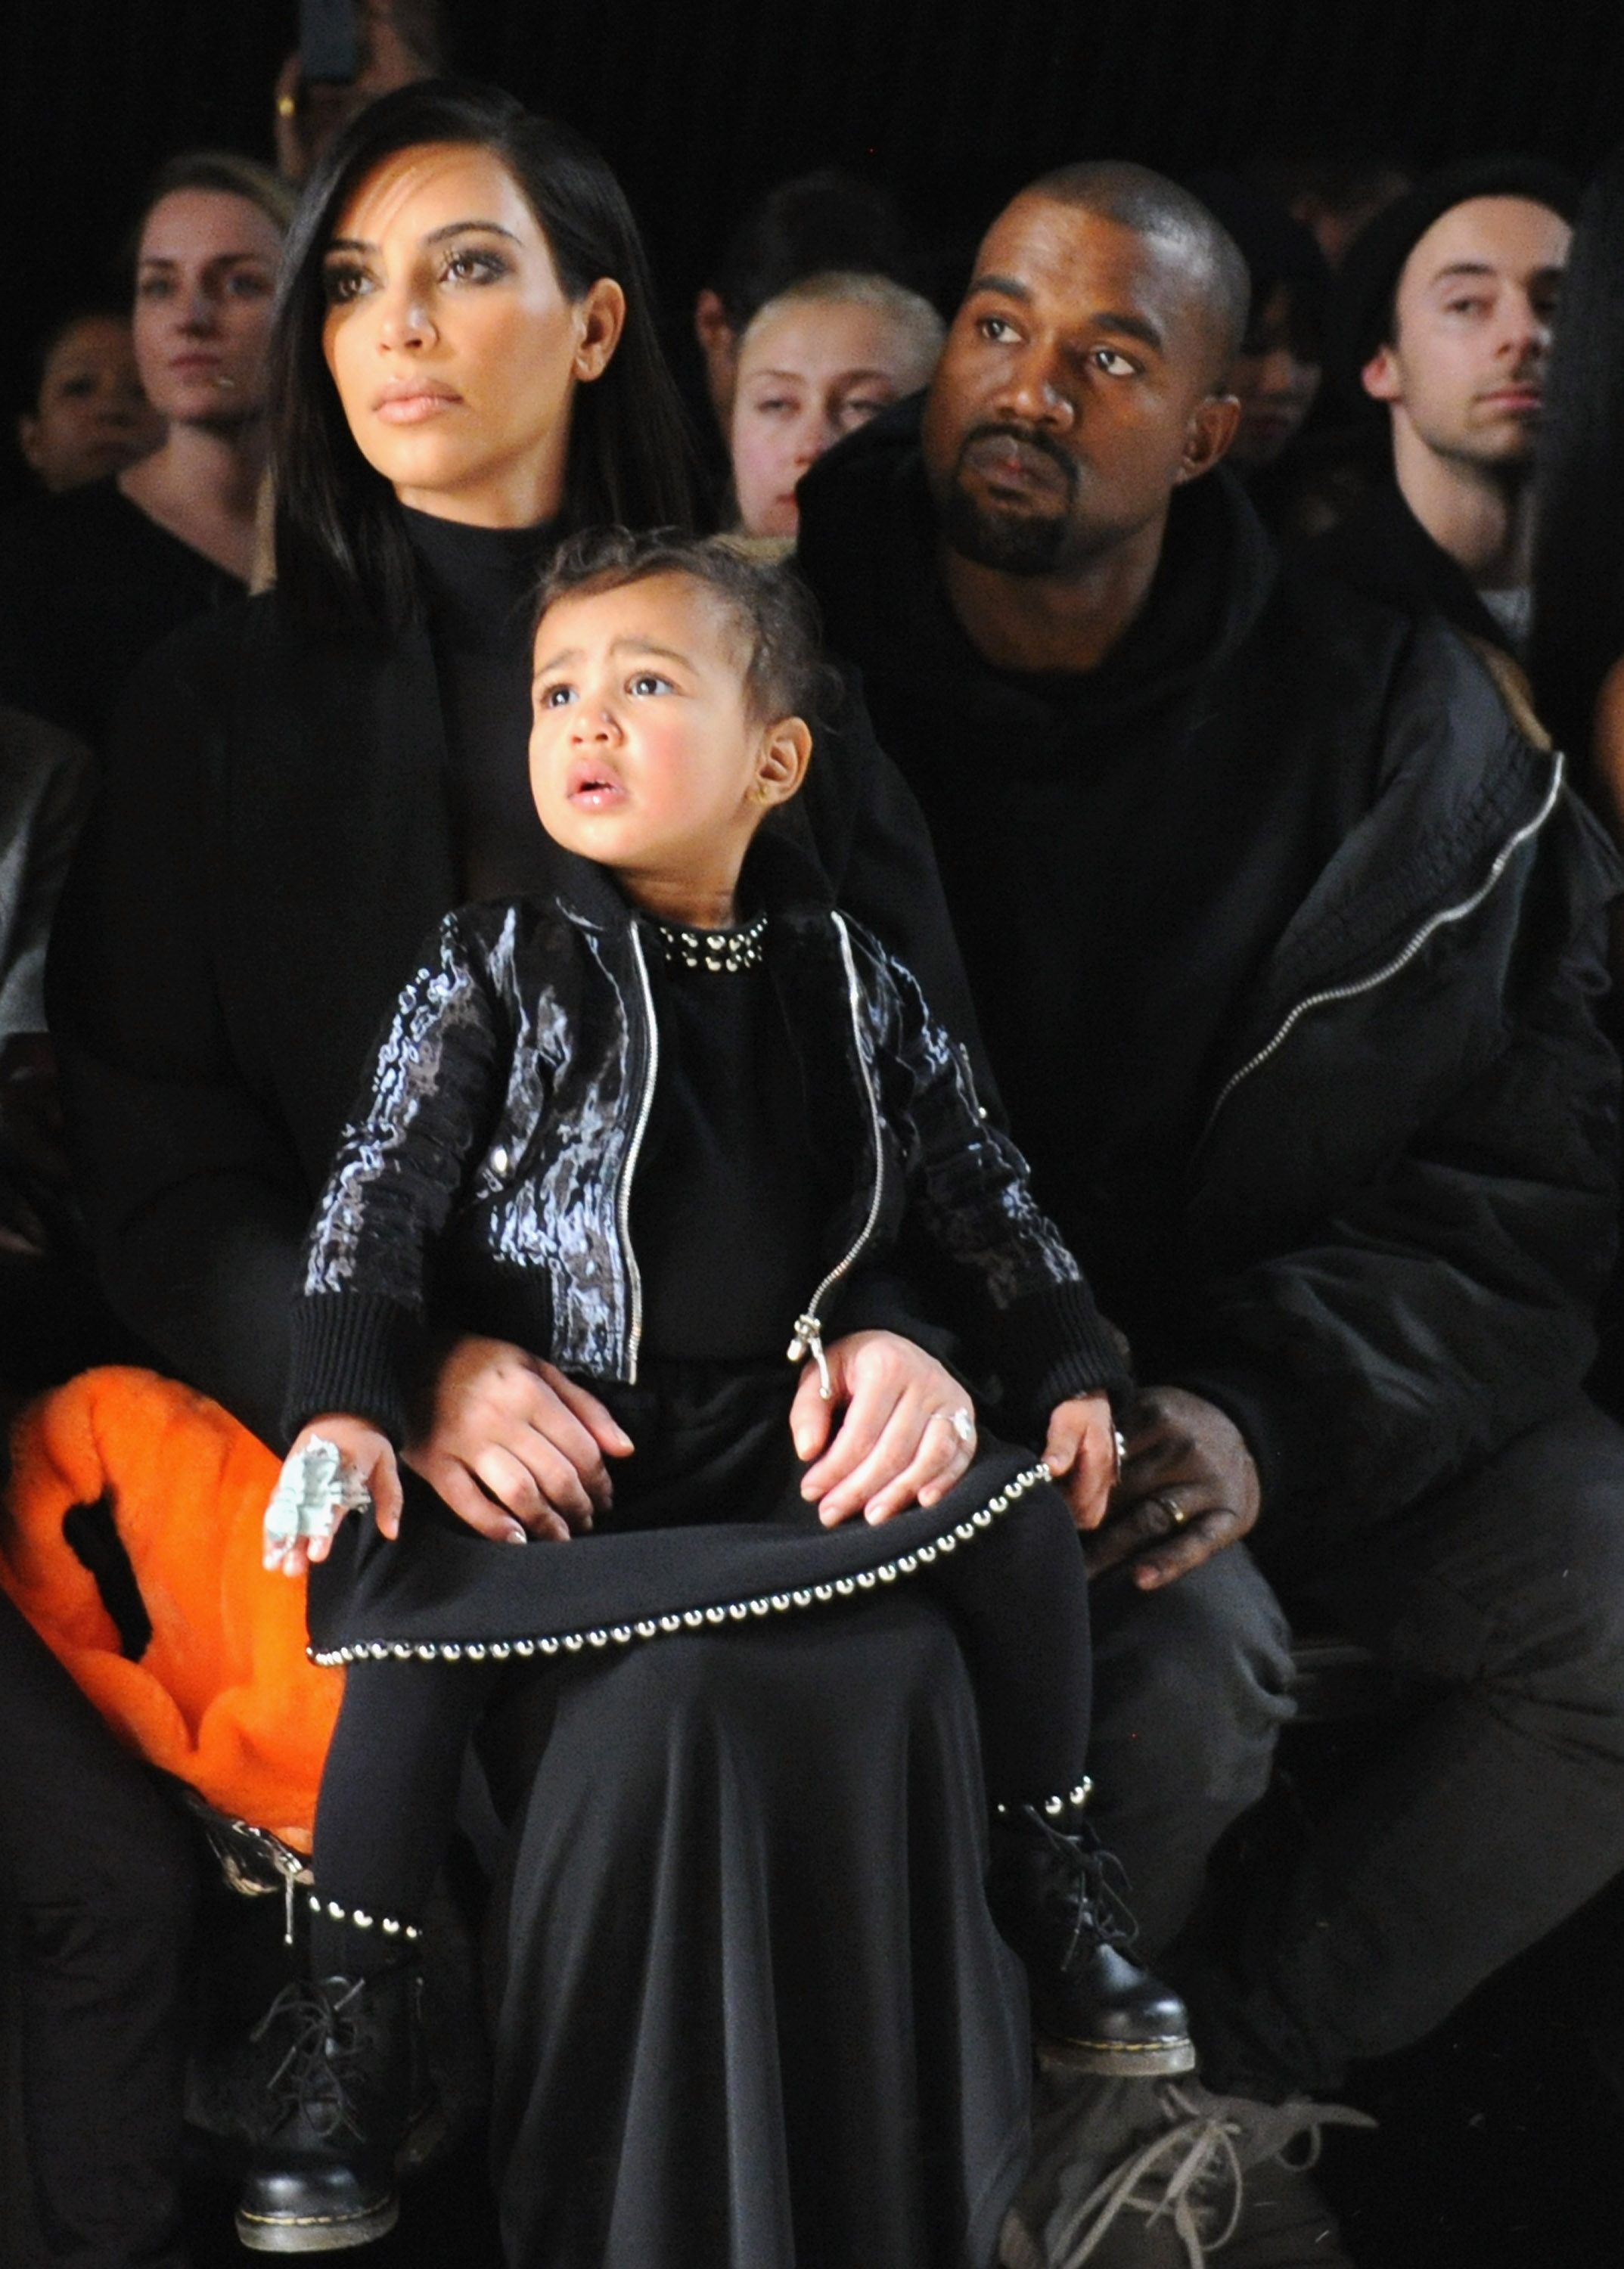 Kim Kardashian, North West, and Kanye West at the Alexander Wang Fashion Show in New York City on February 14, 2015 | Source: Getty Images